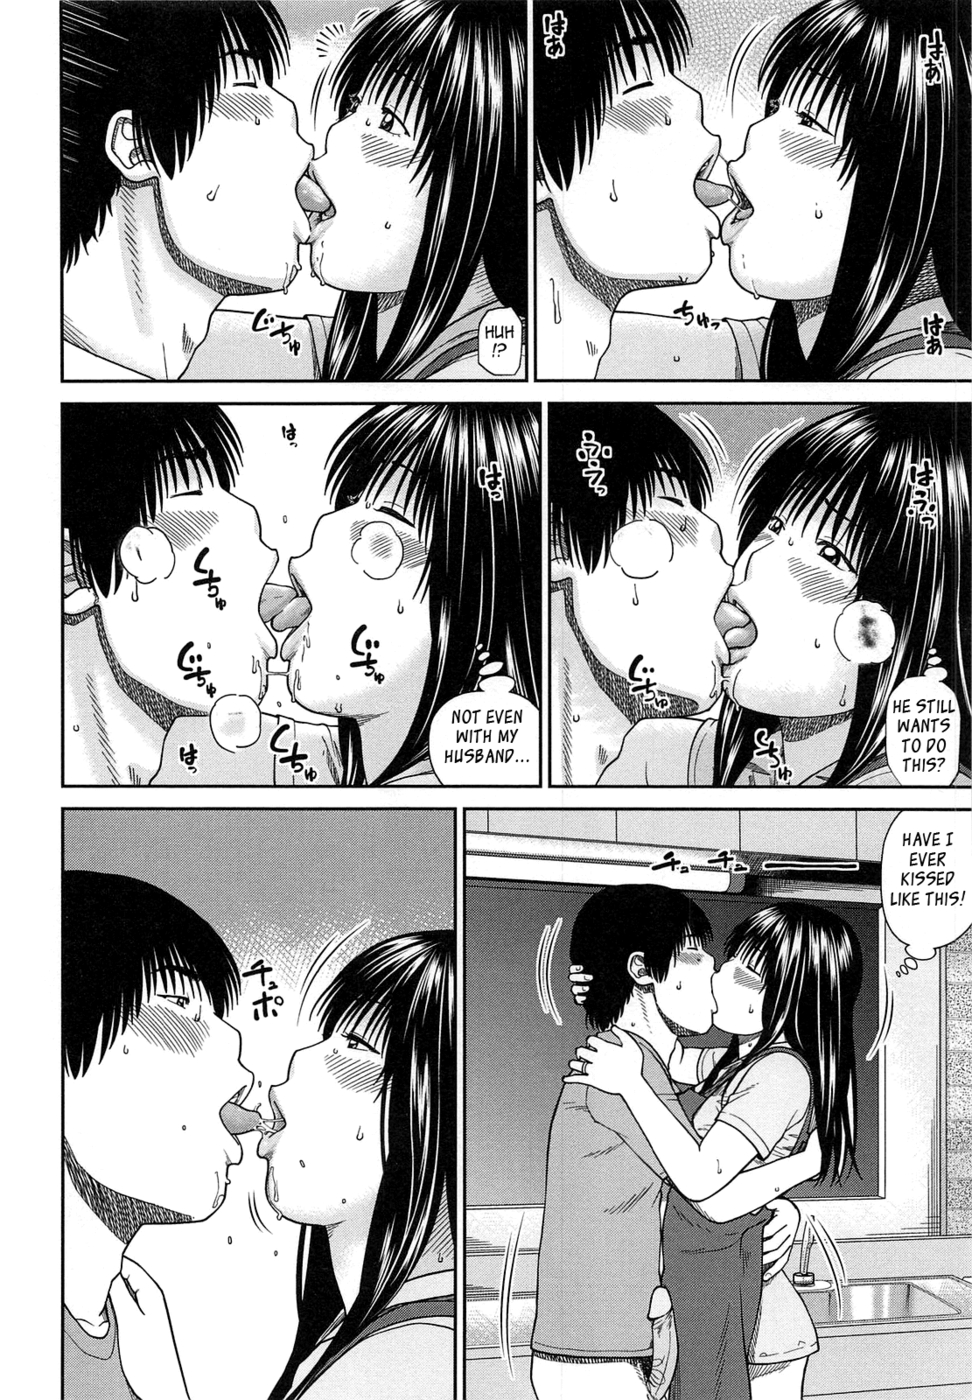 Poranxvide Hd - 35 Year Old Ripe Wife-Chapter 6-The Night I Was Aroused By My Son's Friend  (Second Half)-Hentai Manga Hentai Comic - Page: 4 - Online porn video at  mobile